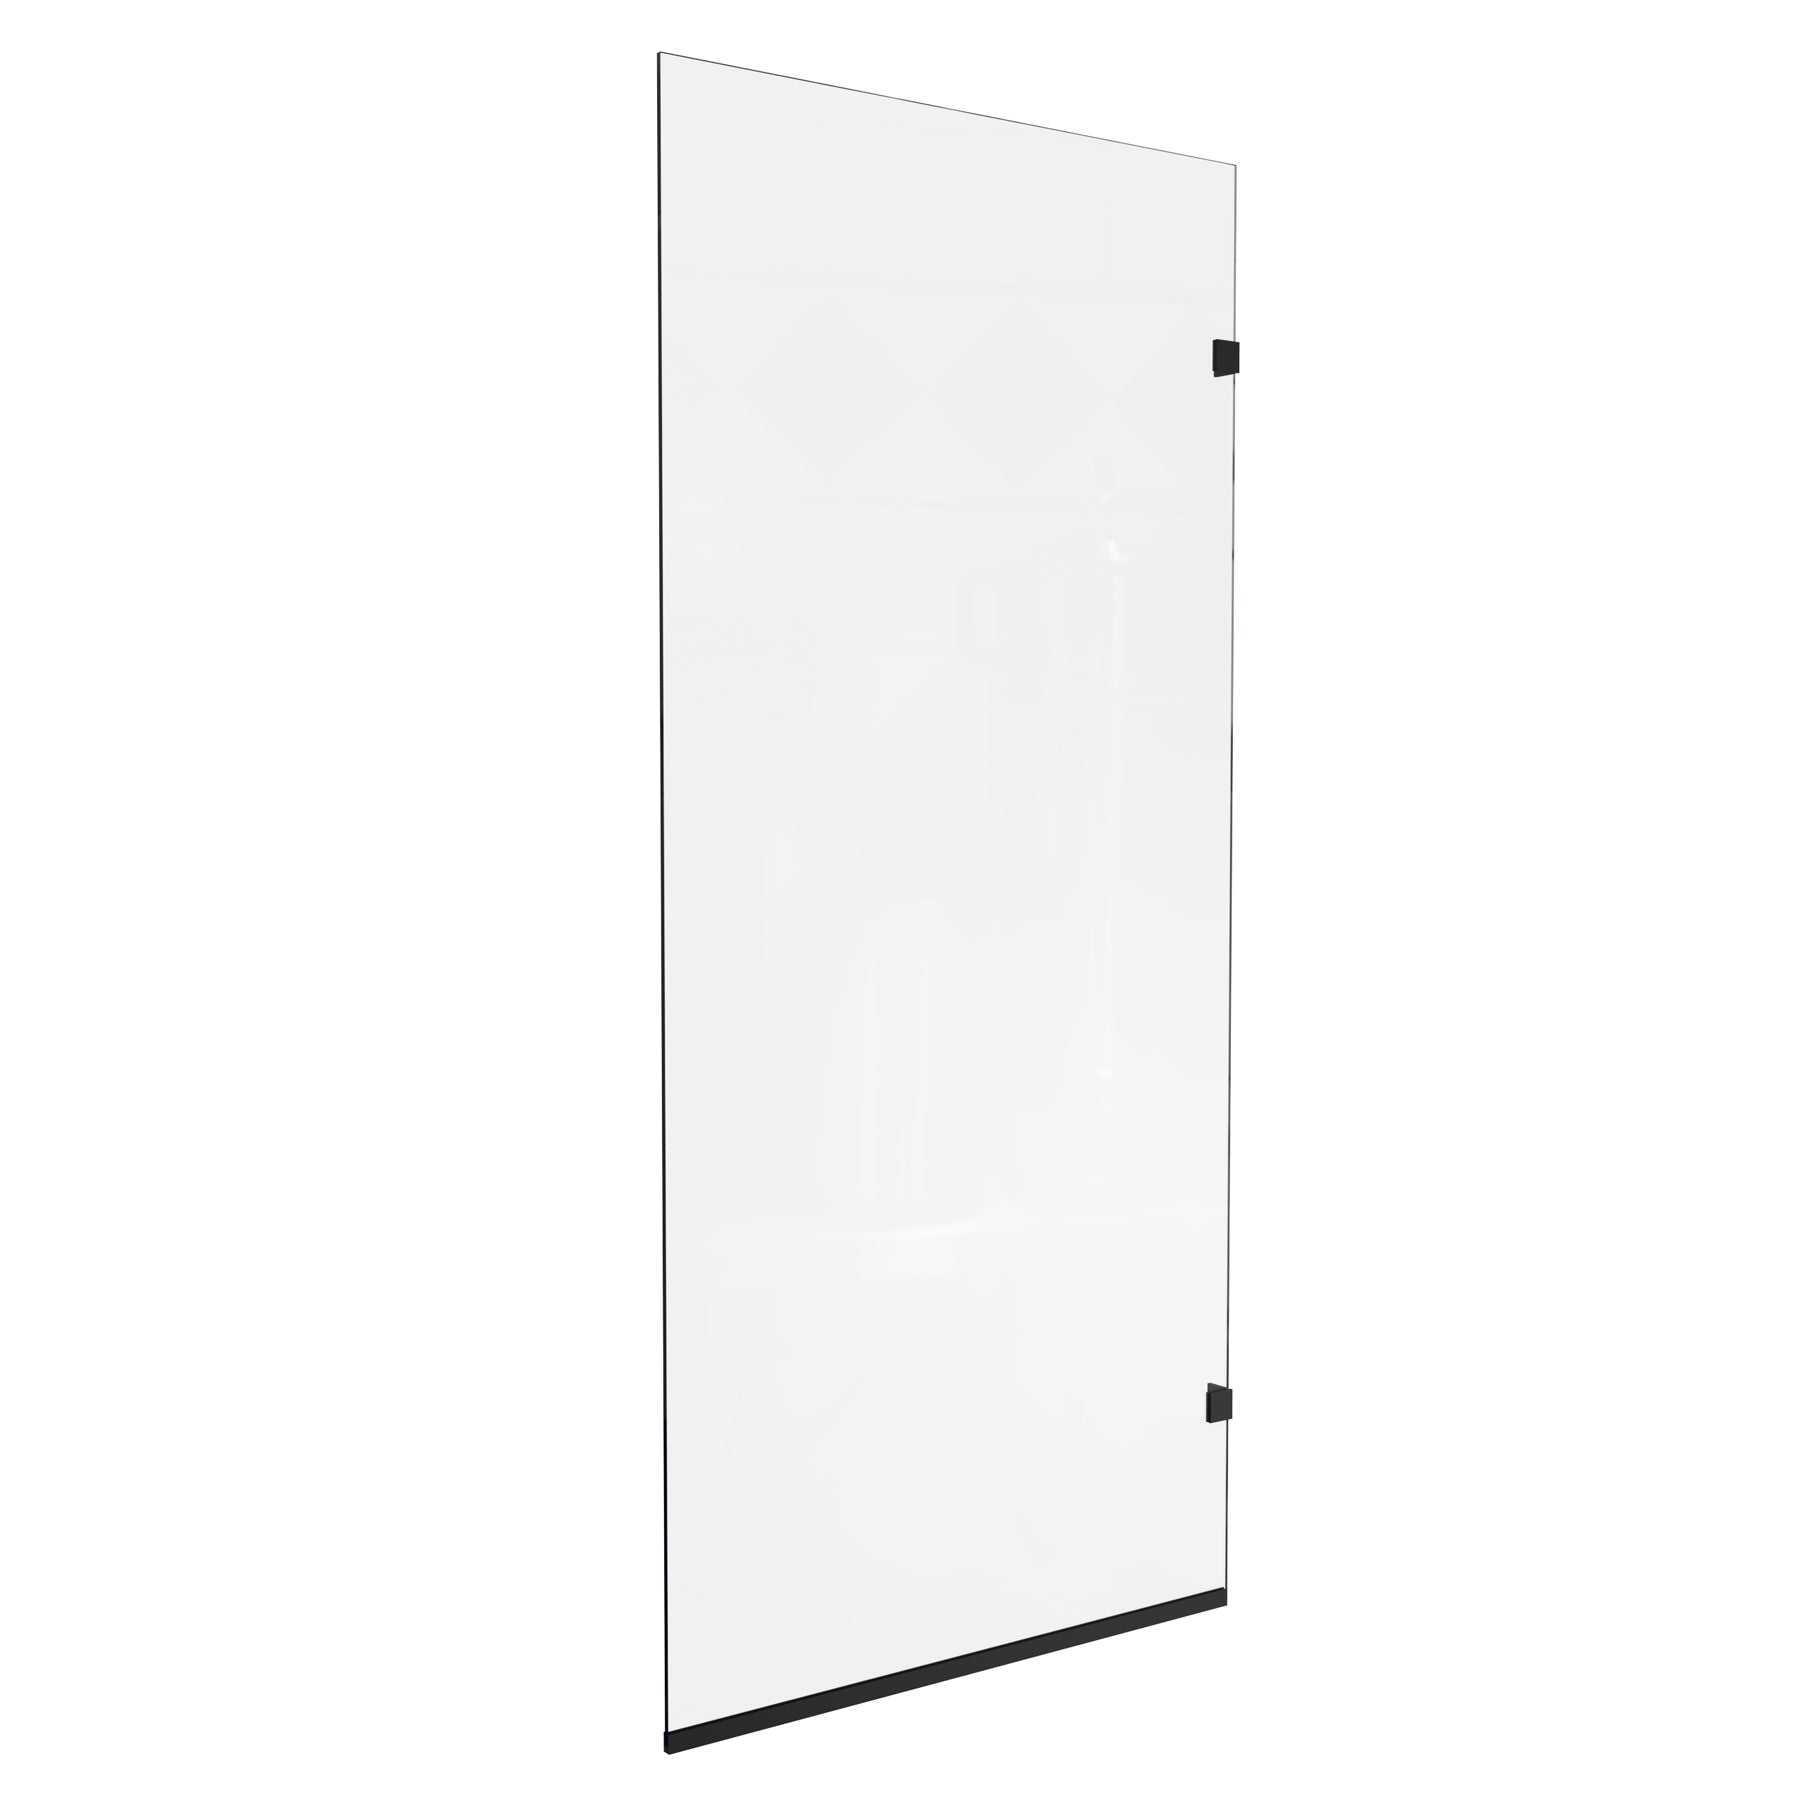 36 In. W x 76 In. H Shower Door Return Panel - 8mm Clear Tempered Glass